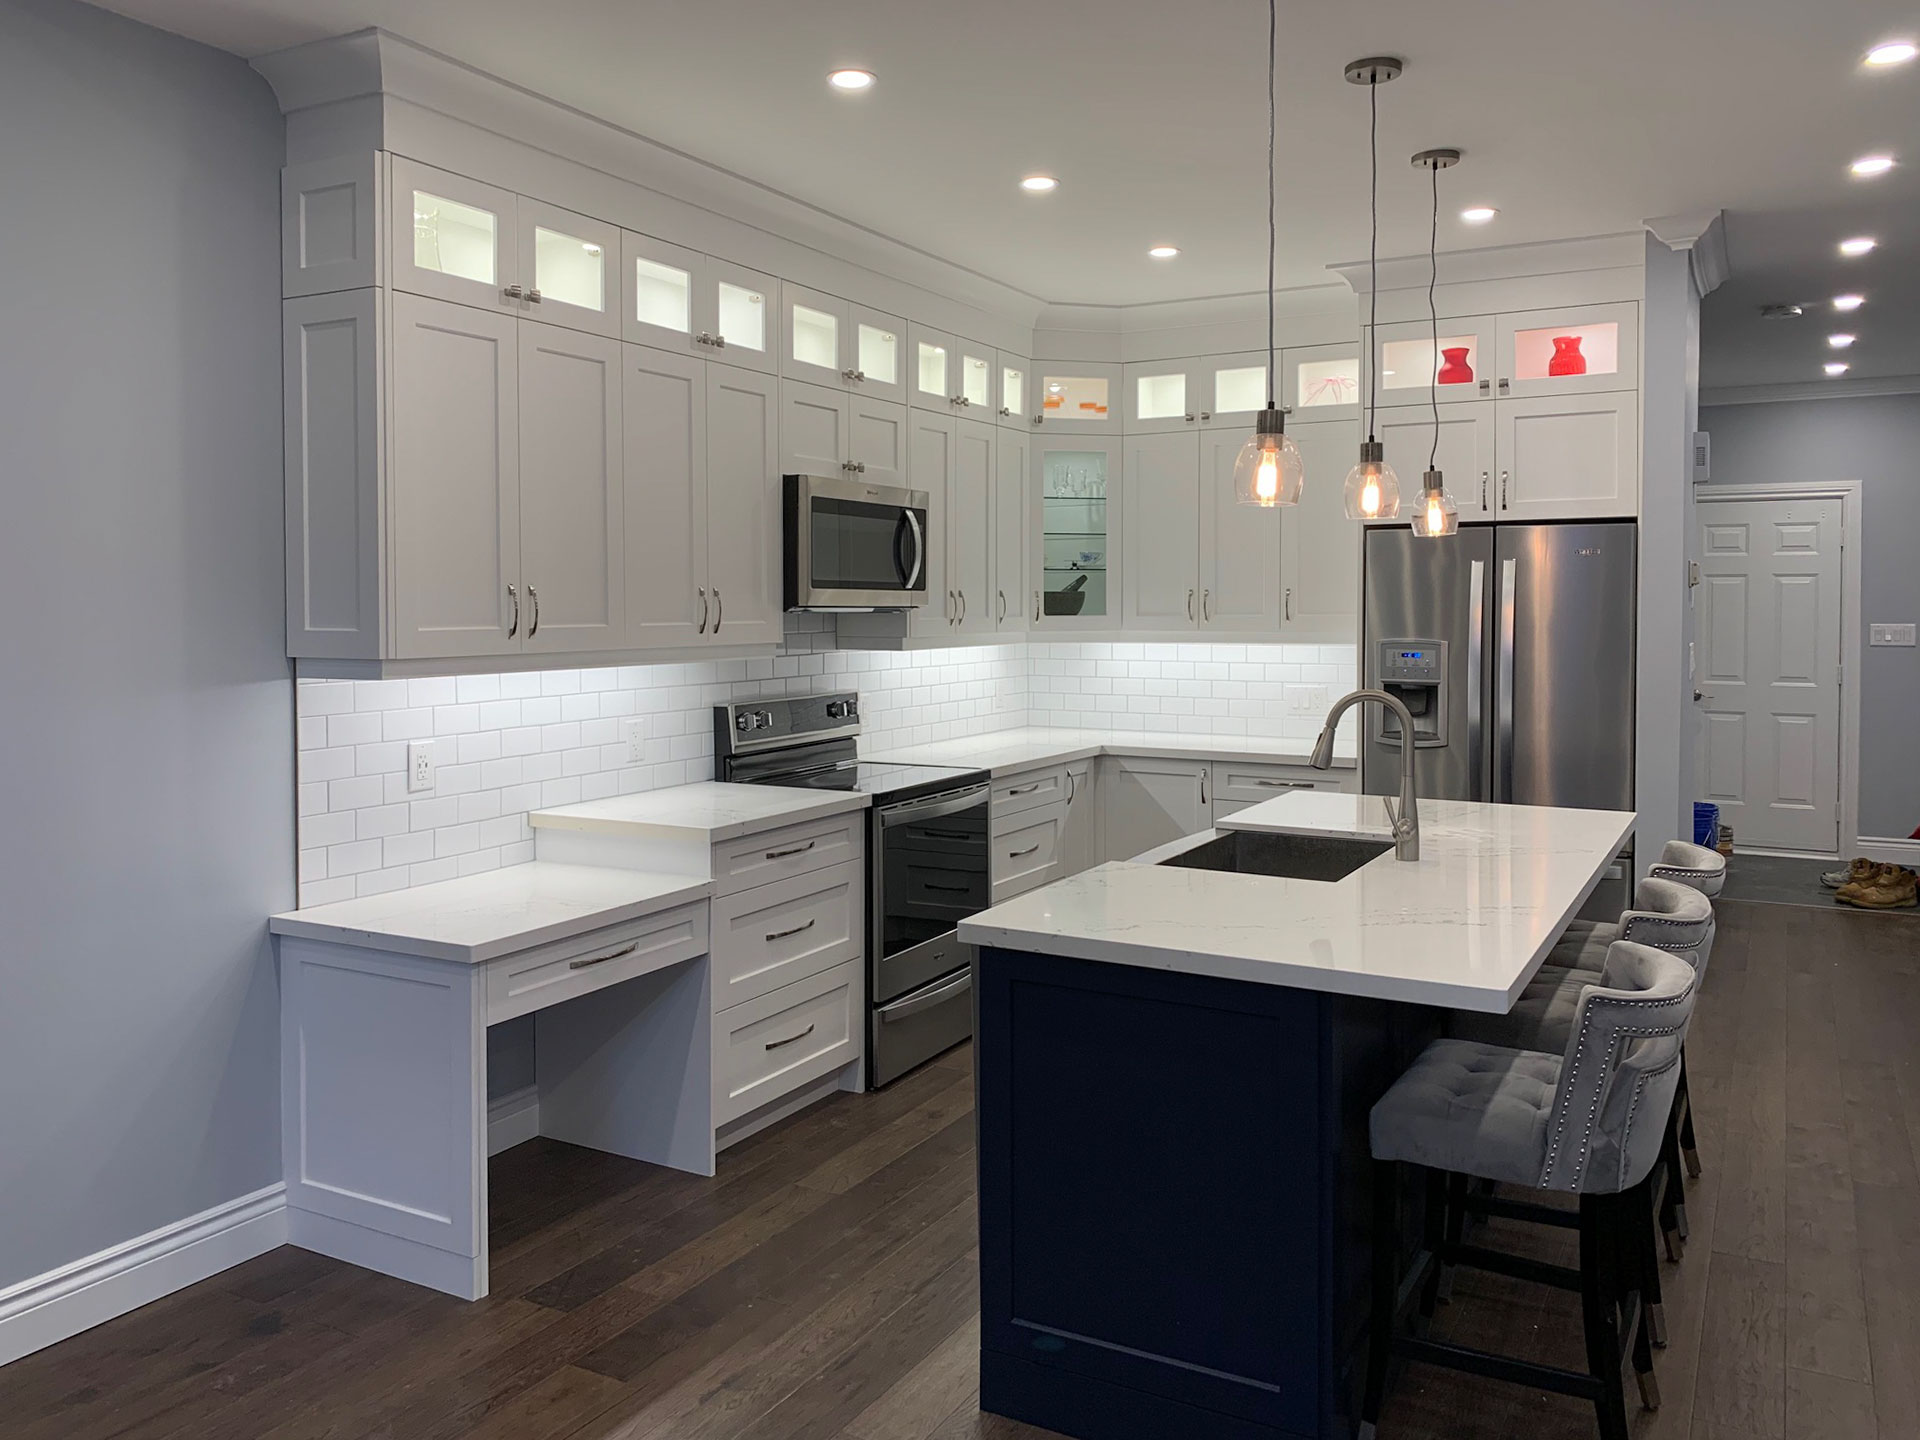 a kitchen interior with custom cabinetry